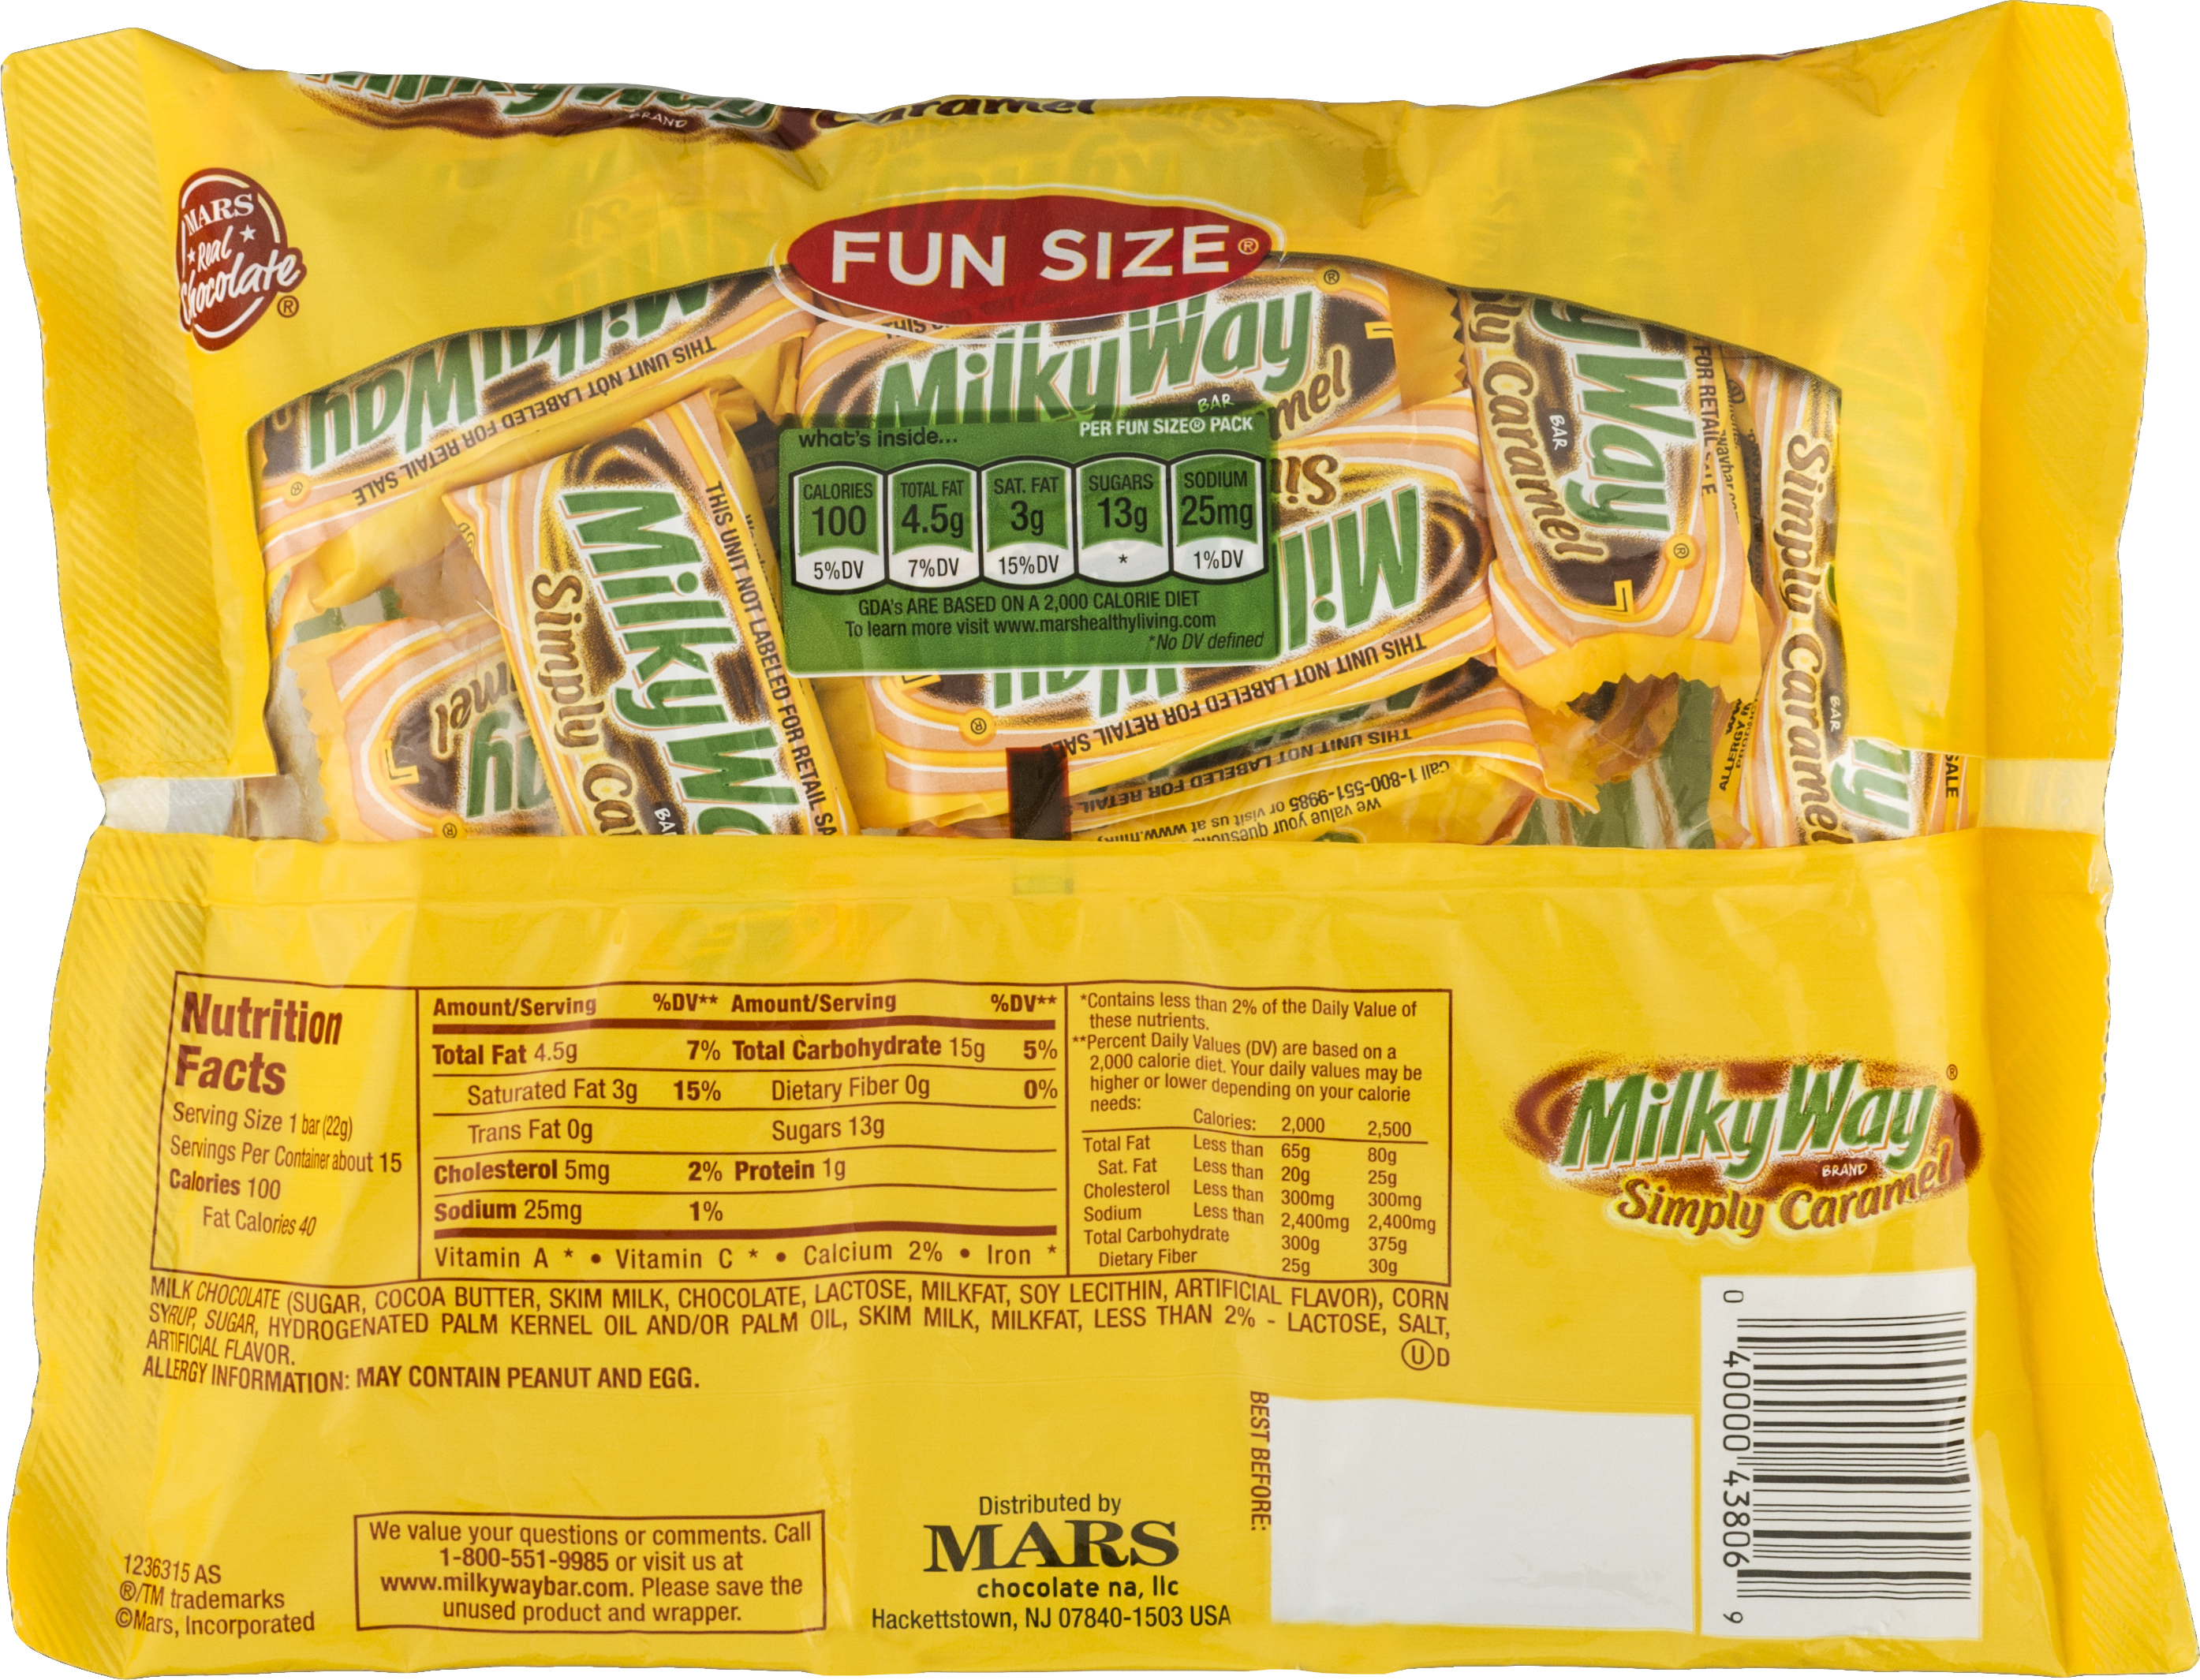 Milky Way Simply Caramel Milk Chocolate Fun Size Bars - M & M's Mandm's Peanut Chocolate Candy, 42 Ounce (2789x2130), Png Download